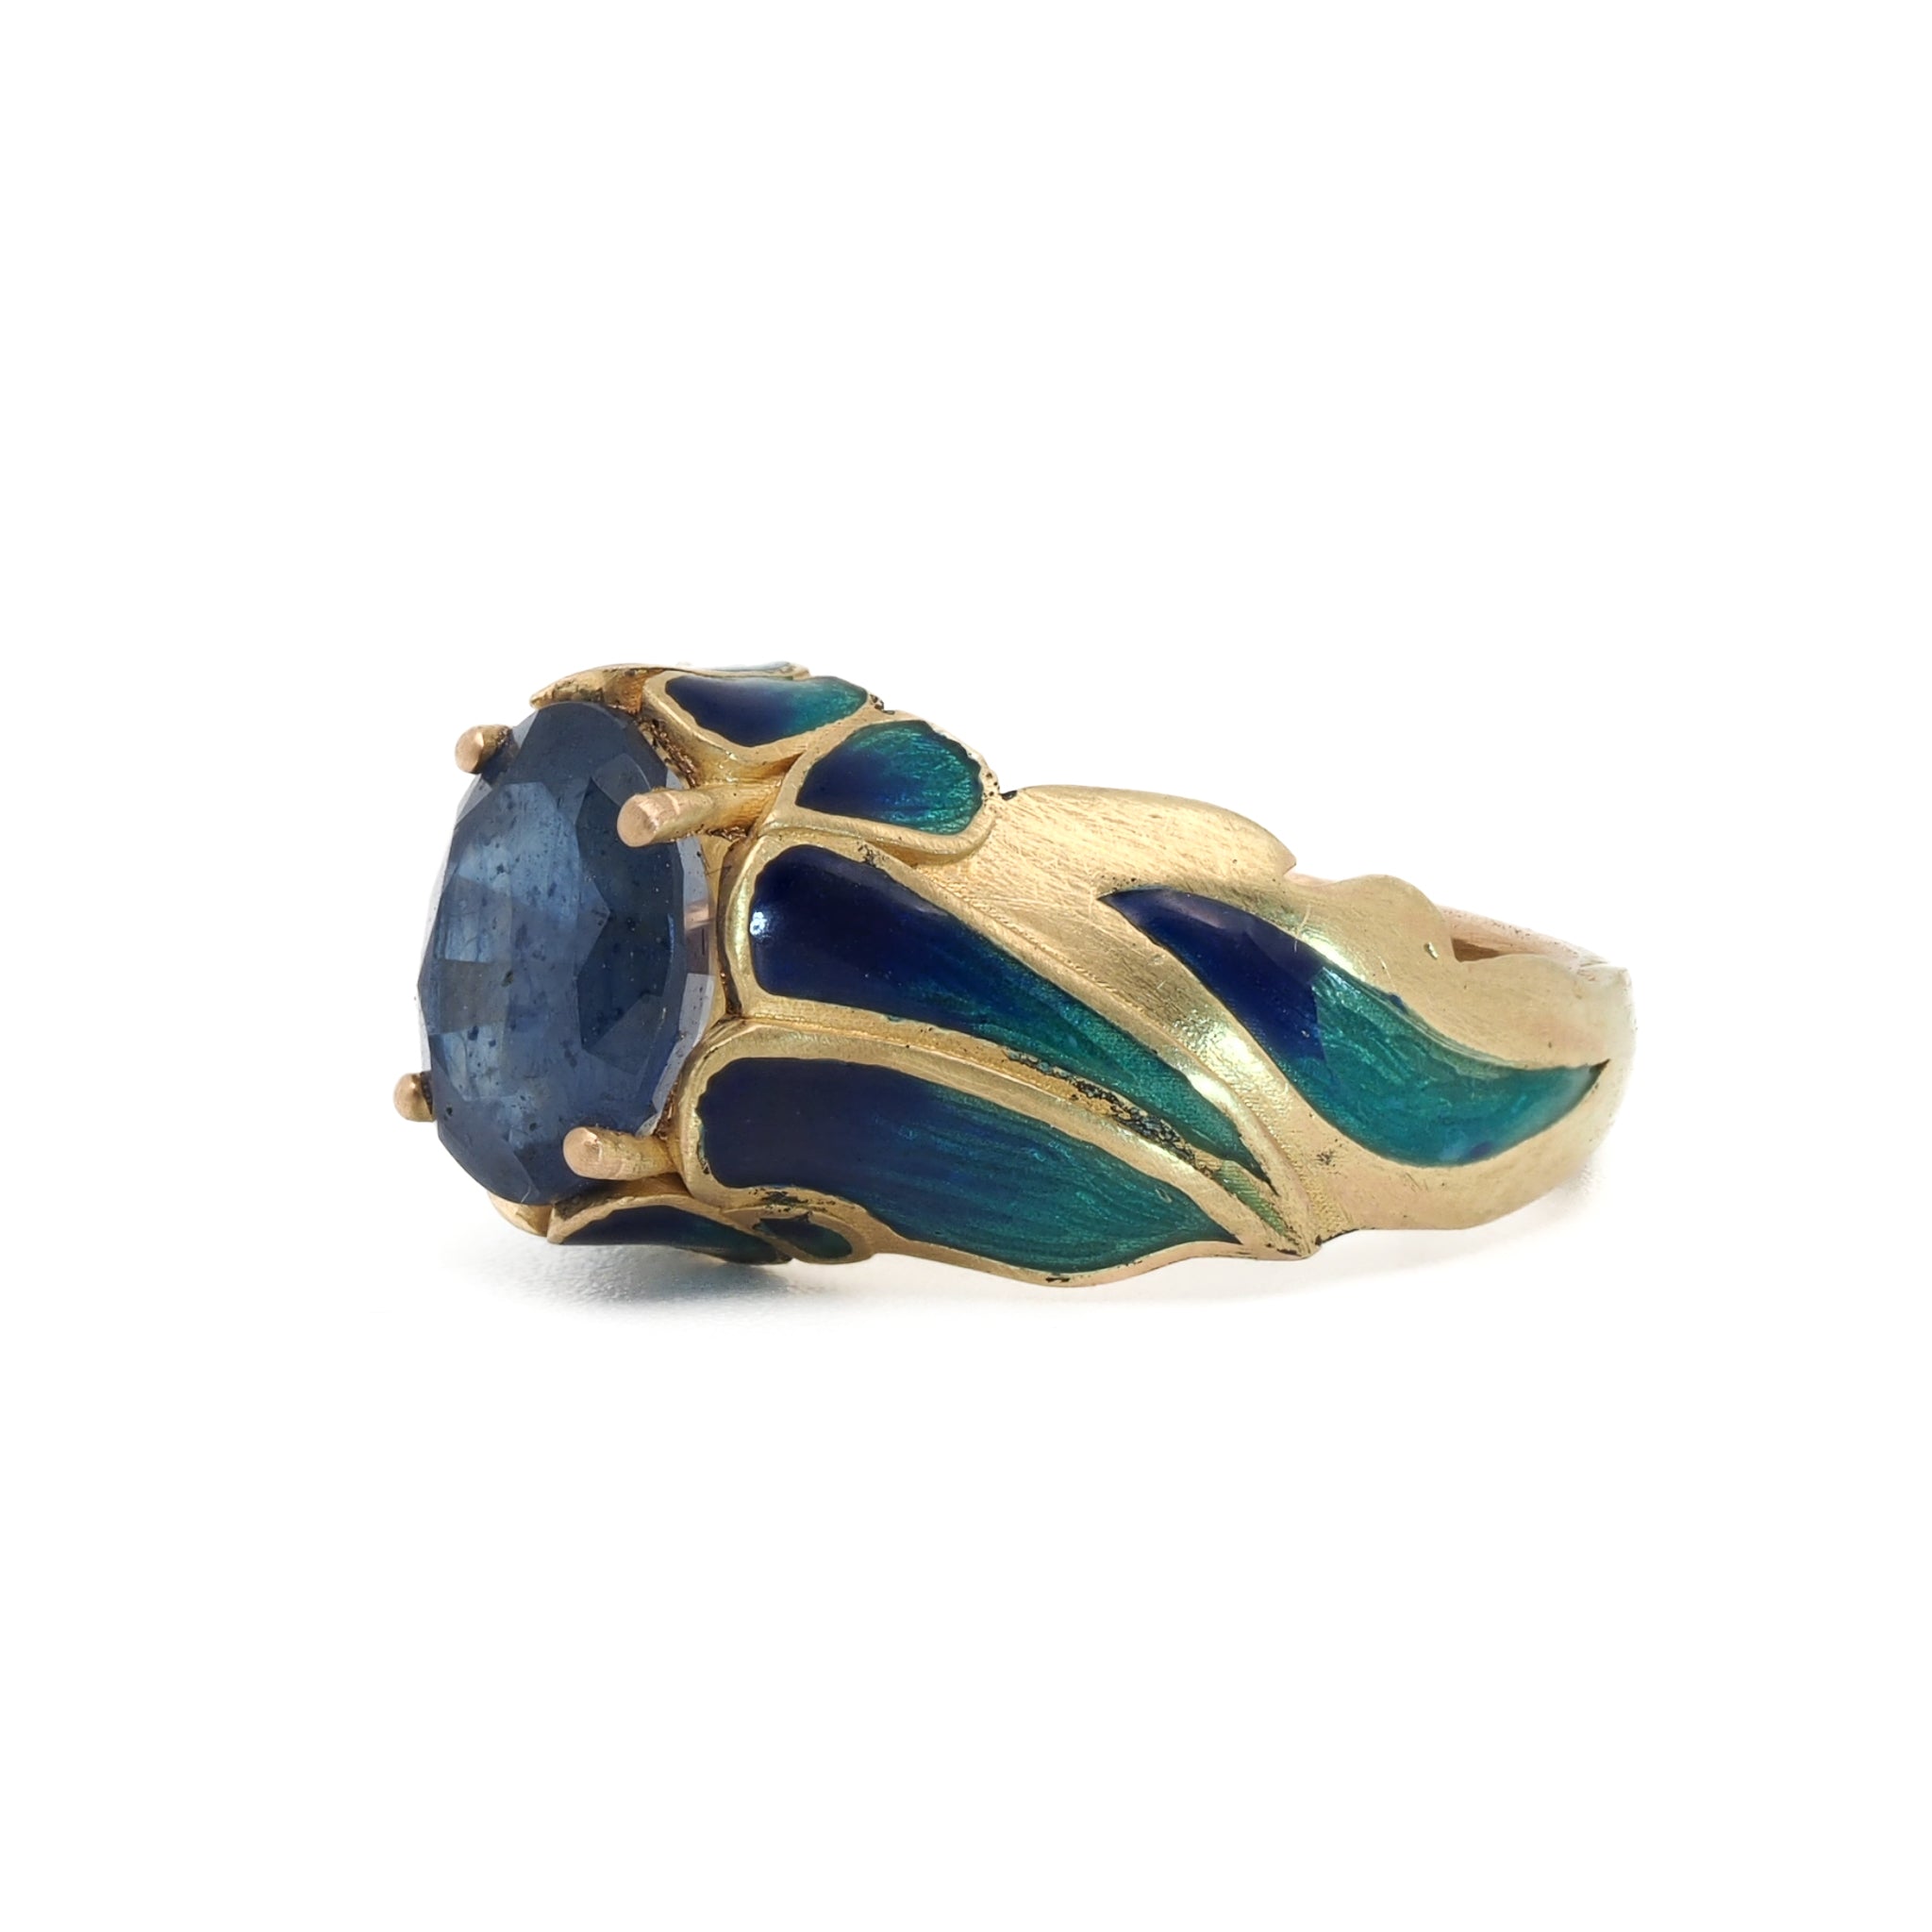 Ebru Jewelry Luxury Series - Exquisite Sapphire Flame Ring for a regal and elegant look.